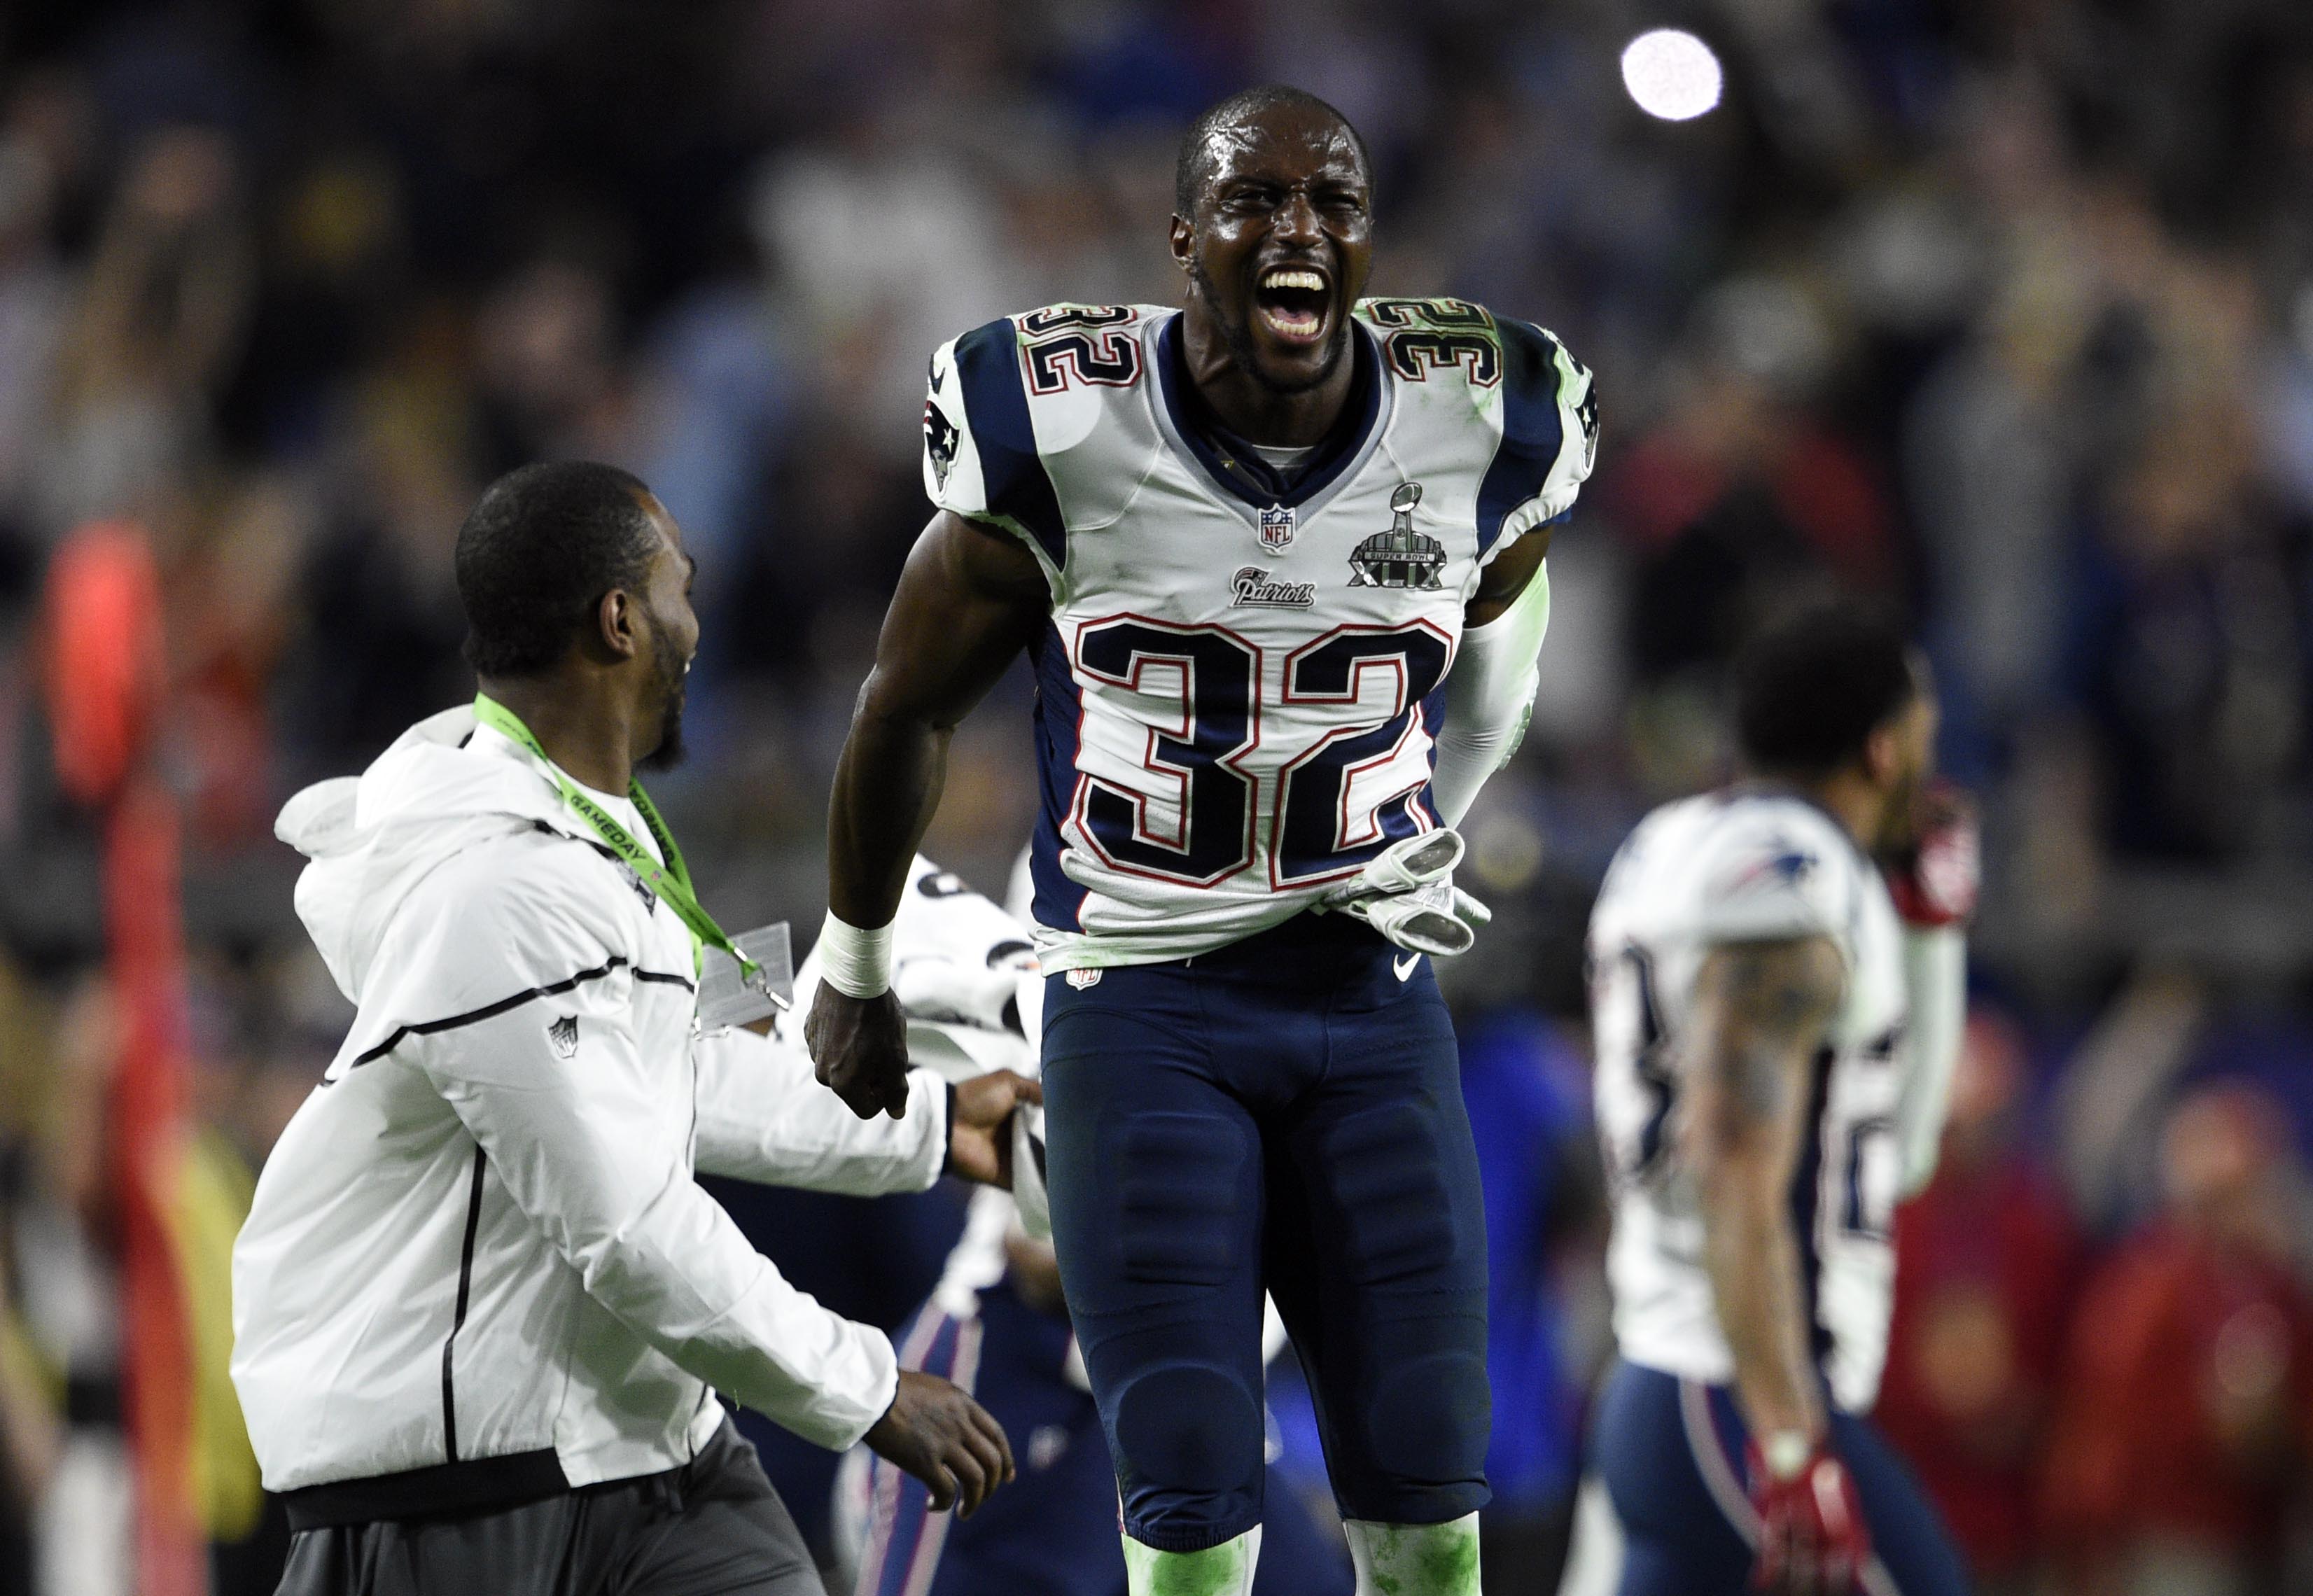 Devin McCourty is one of several key players returning to the Patriots, but New England's defense still has holes. (Kyle Terada, USA TODAY Sports)